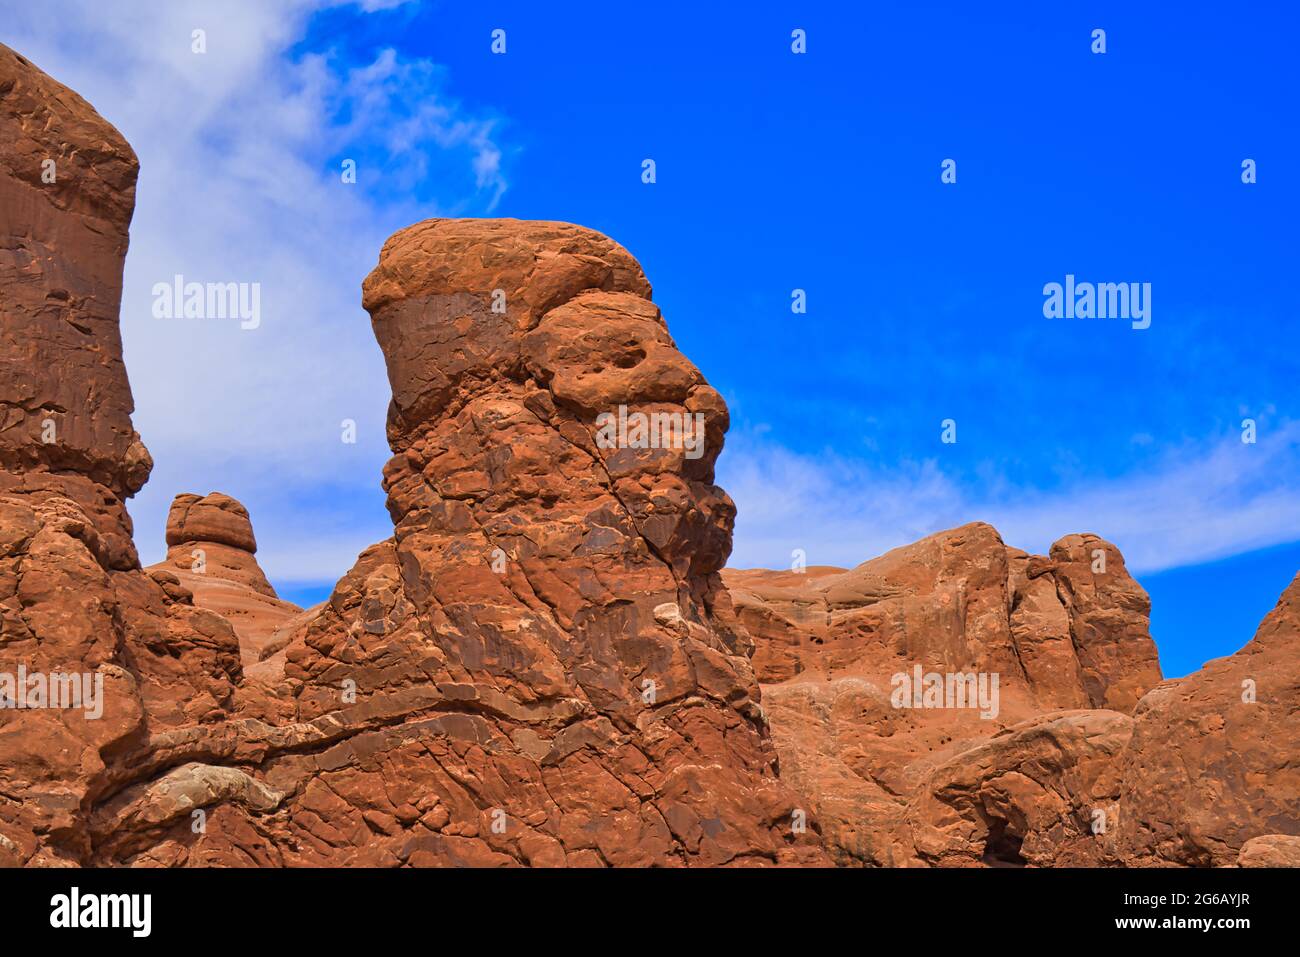 More than 2,000 natural sandstone arches are located in Arches National Park.  The highest density of natural arches in the world. Utah, USA. 2017. Stock Photo